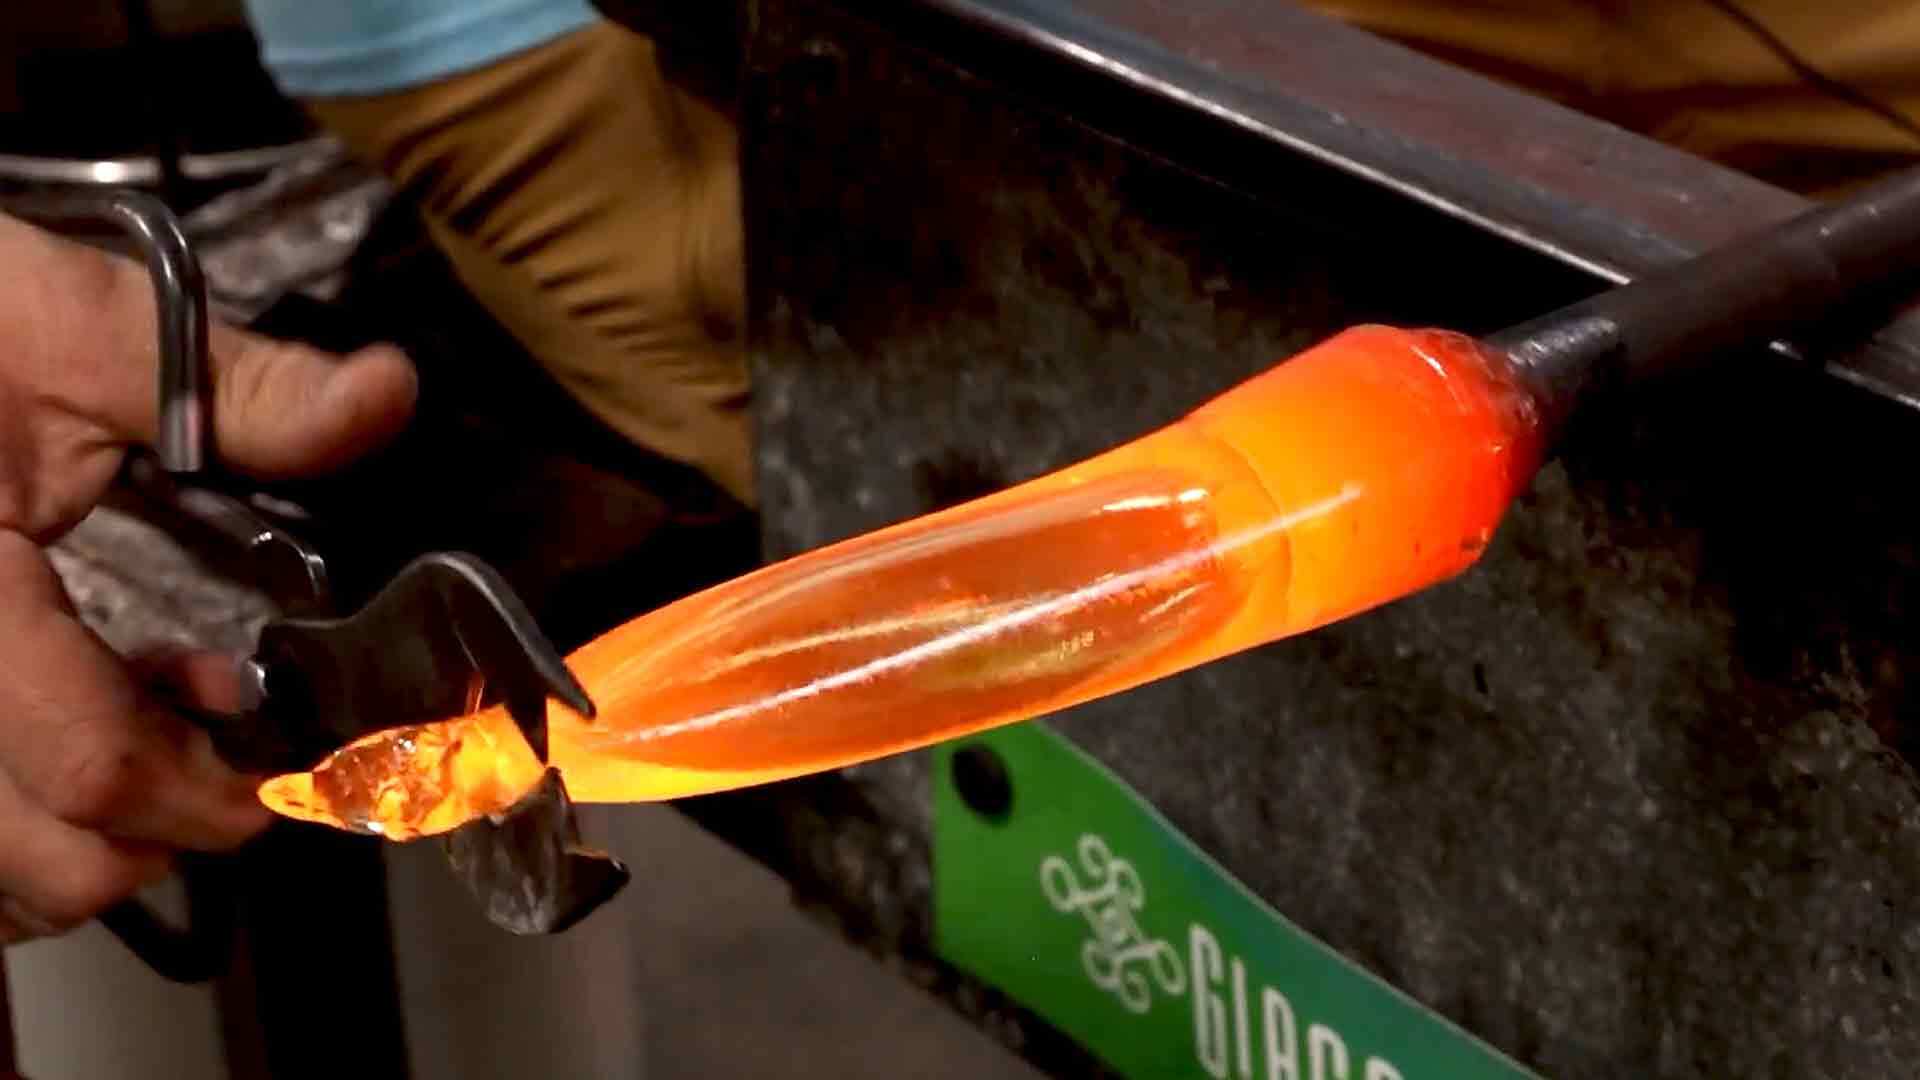 Load video: Did you know we stream LIVE glassblowing on Facebook and YouTube every week? Join us on Tuesdays at 6:00PM (EST) for our two hour show of The Gathering Point.